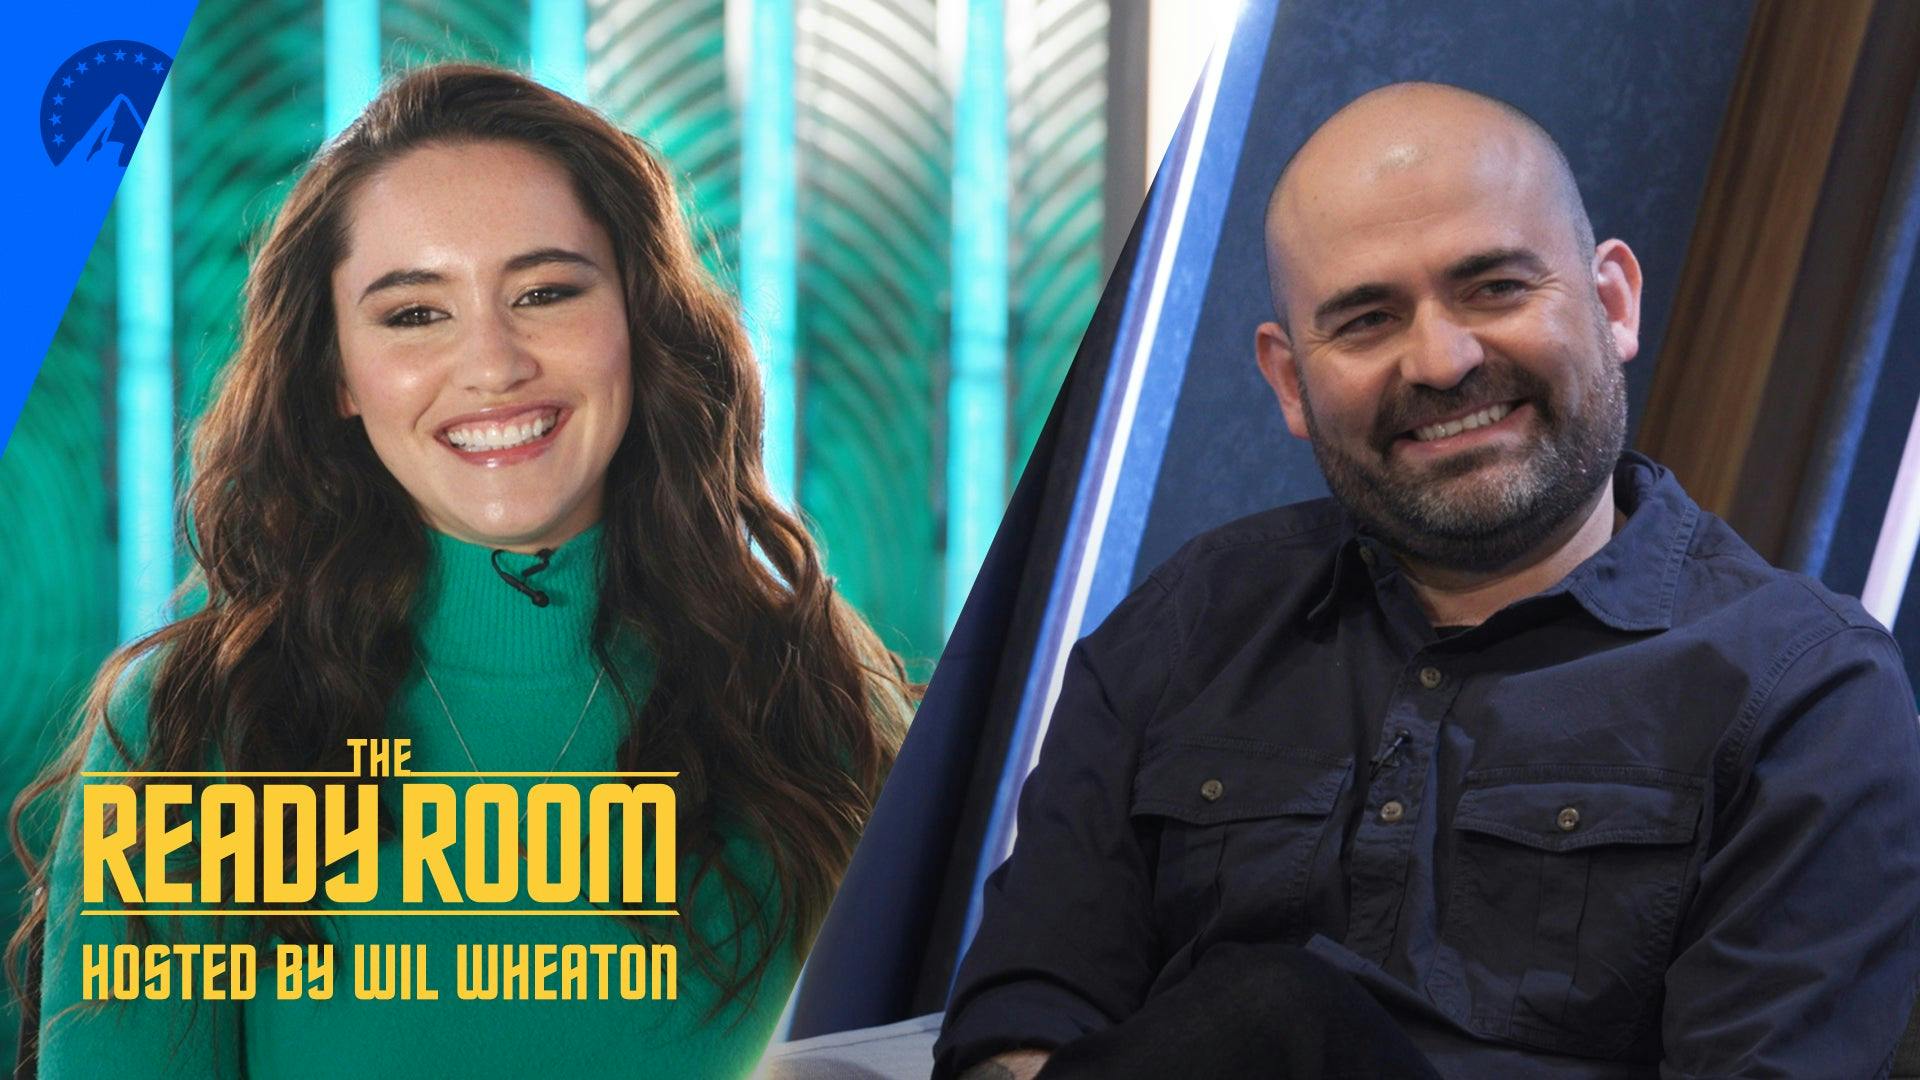 Christina Chong and Davy Perez smile at the camera. On the left, yellow letters read The Ready Room: Hosted by Wil Wheaton